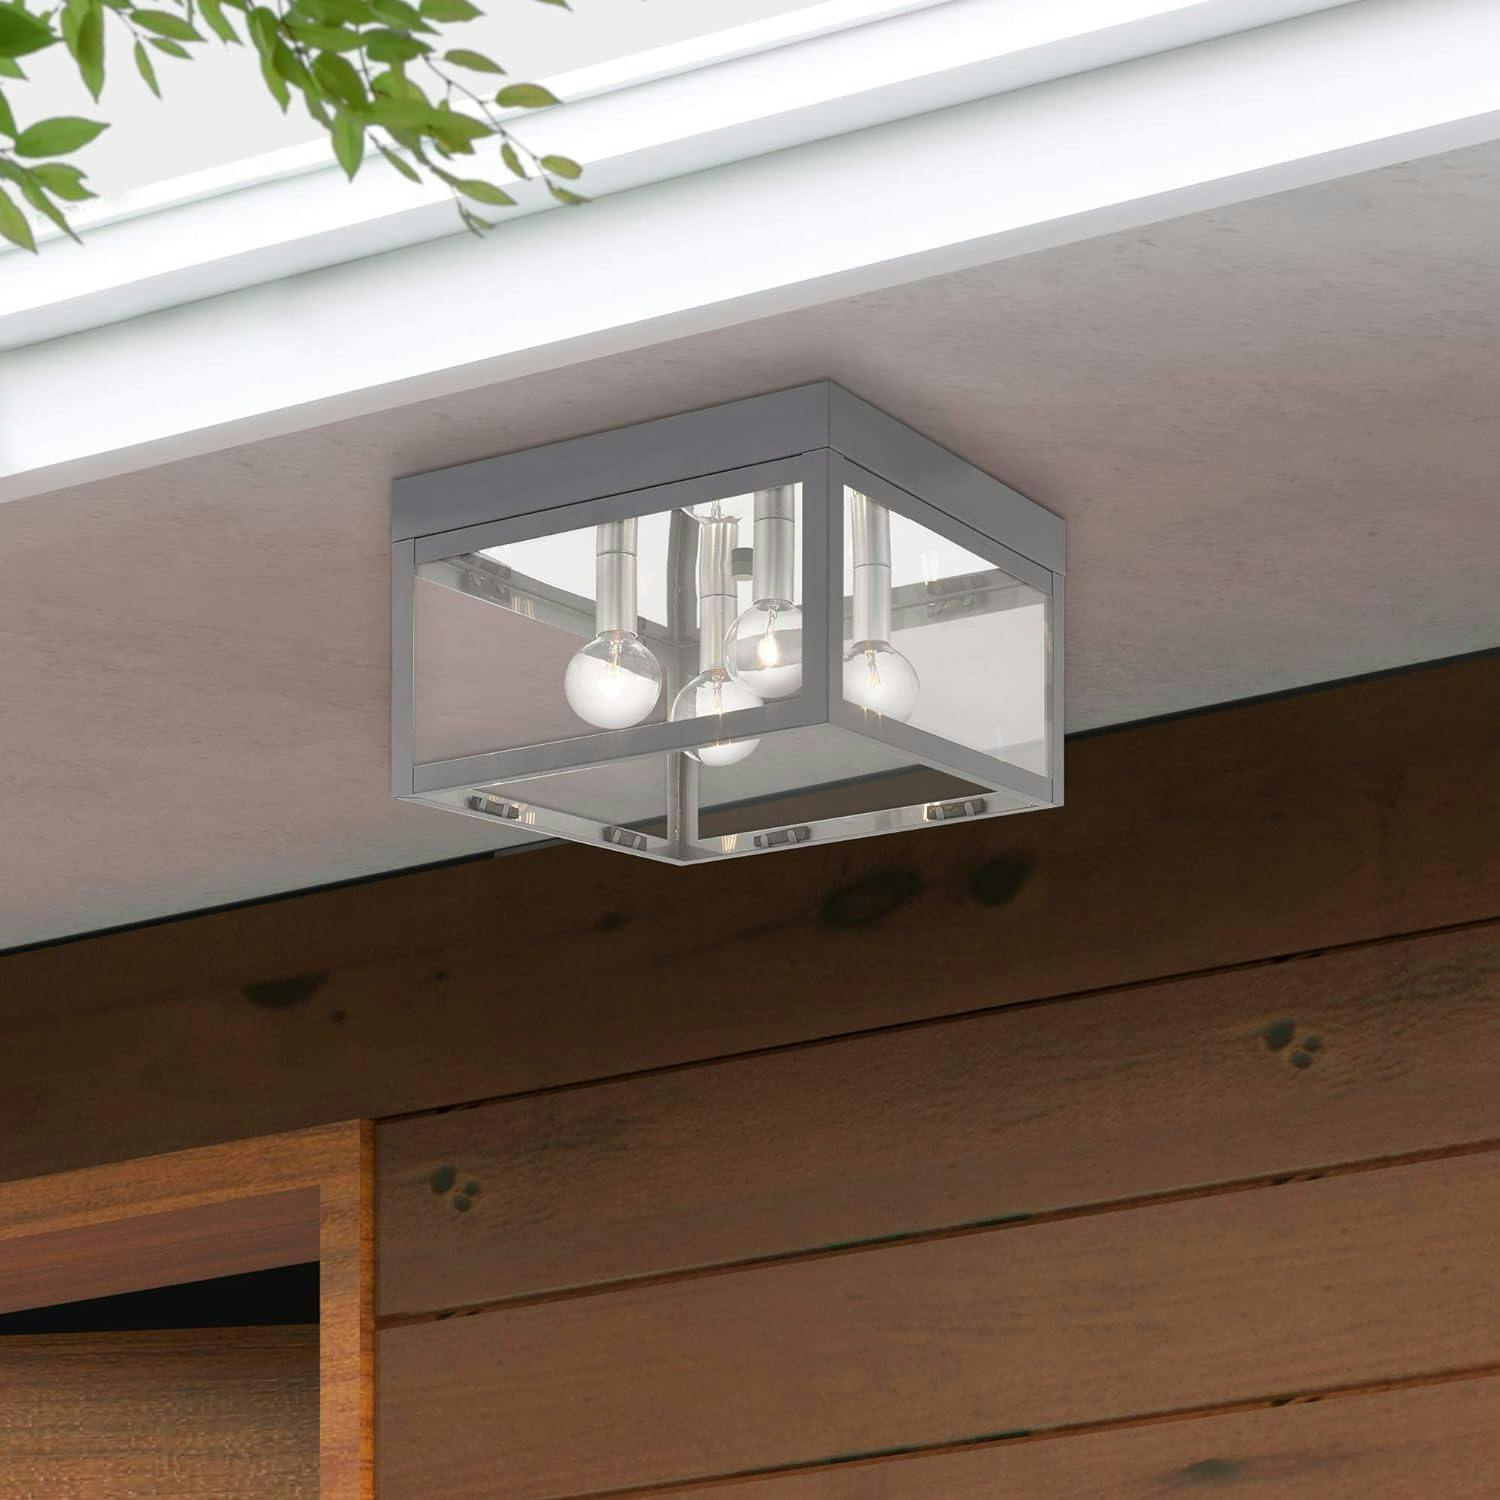 Nyack Square Black Outdoor Ceiling Mount with Clear Glass